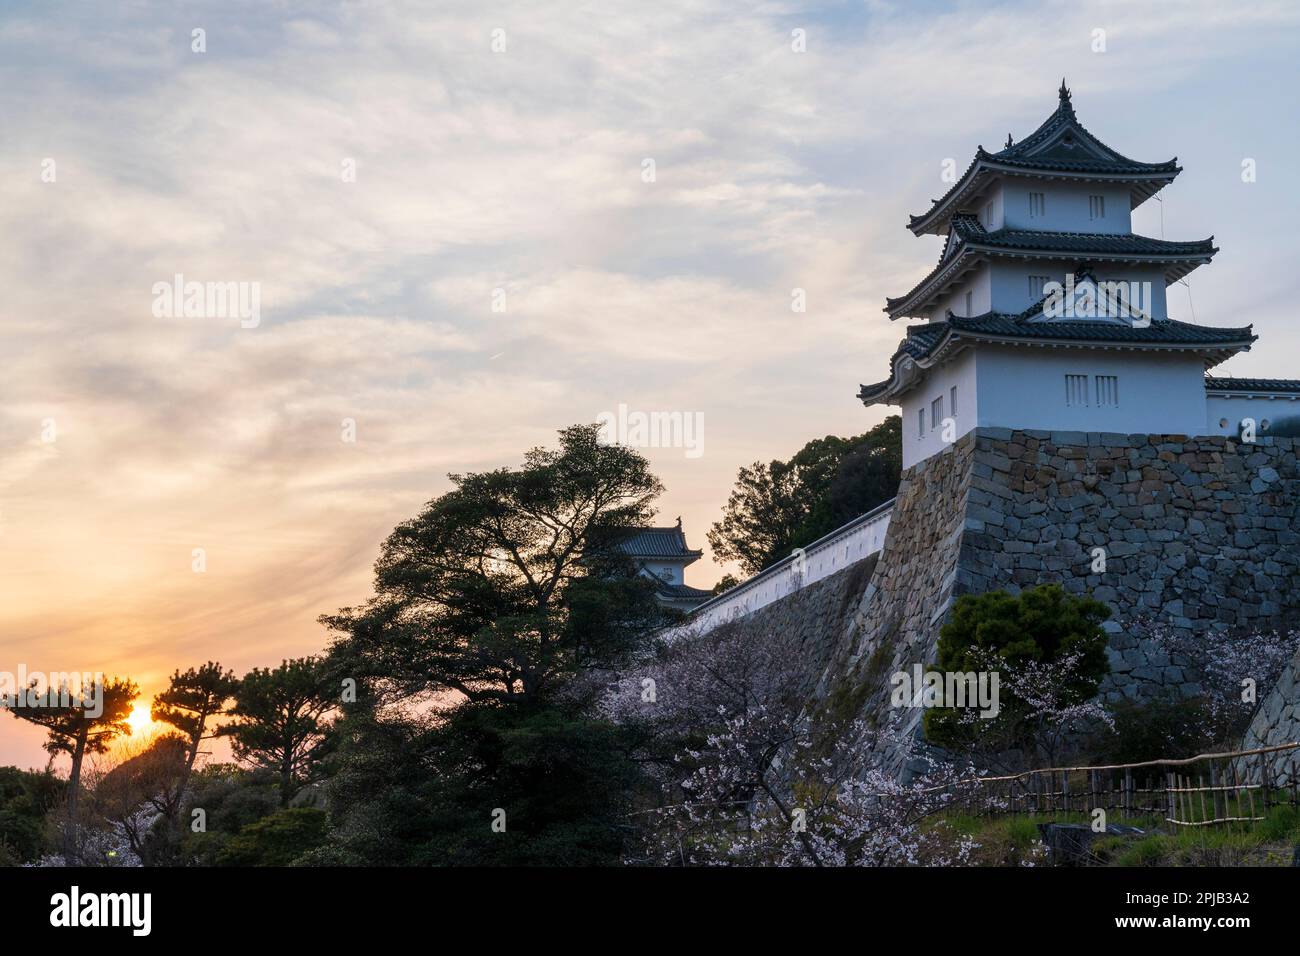 Sunset at Akashi castle in Japan. View along the two Edo Period yagura, turrets, separated by a long stone wall, ishigaki with dobei white plaster wall on top. The sun setting in some trees in a cloudy blue sky. Stock Photo